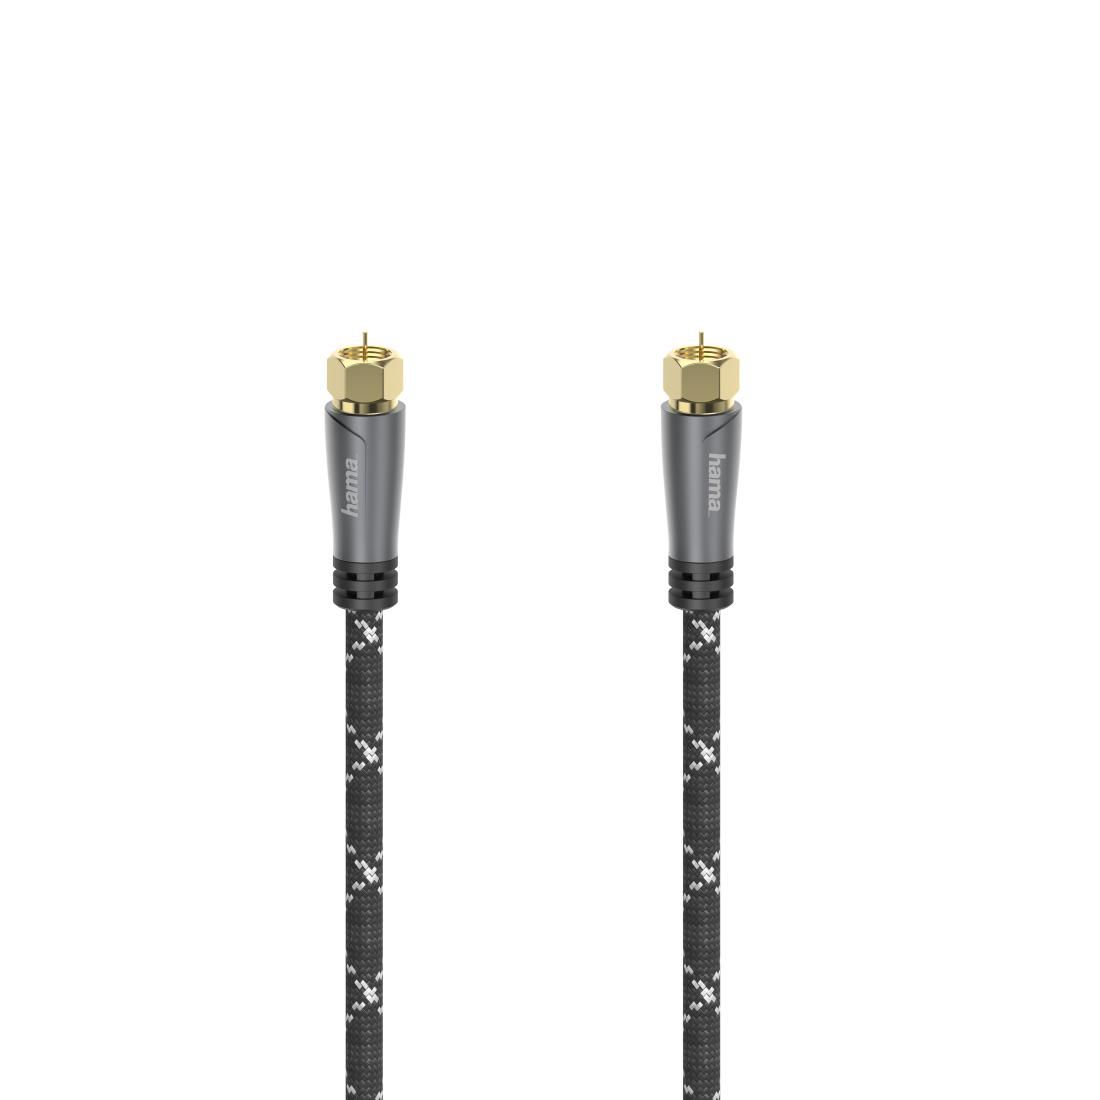 Hama 205077 W128824520 7 Coaxial Cable 1.5 M F 